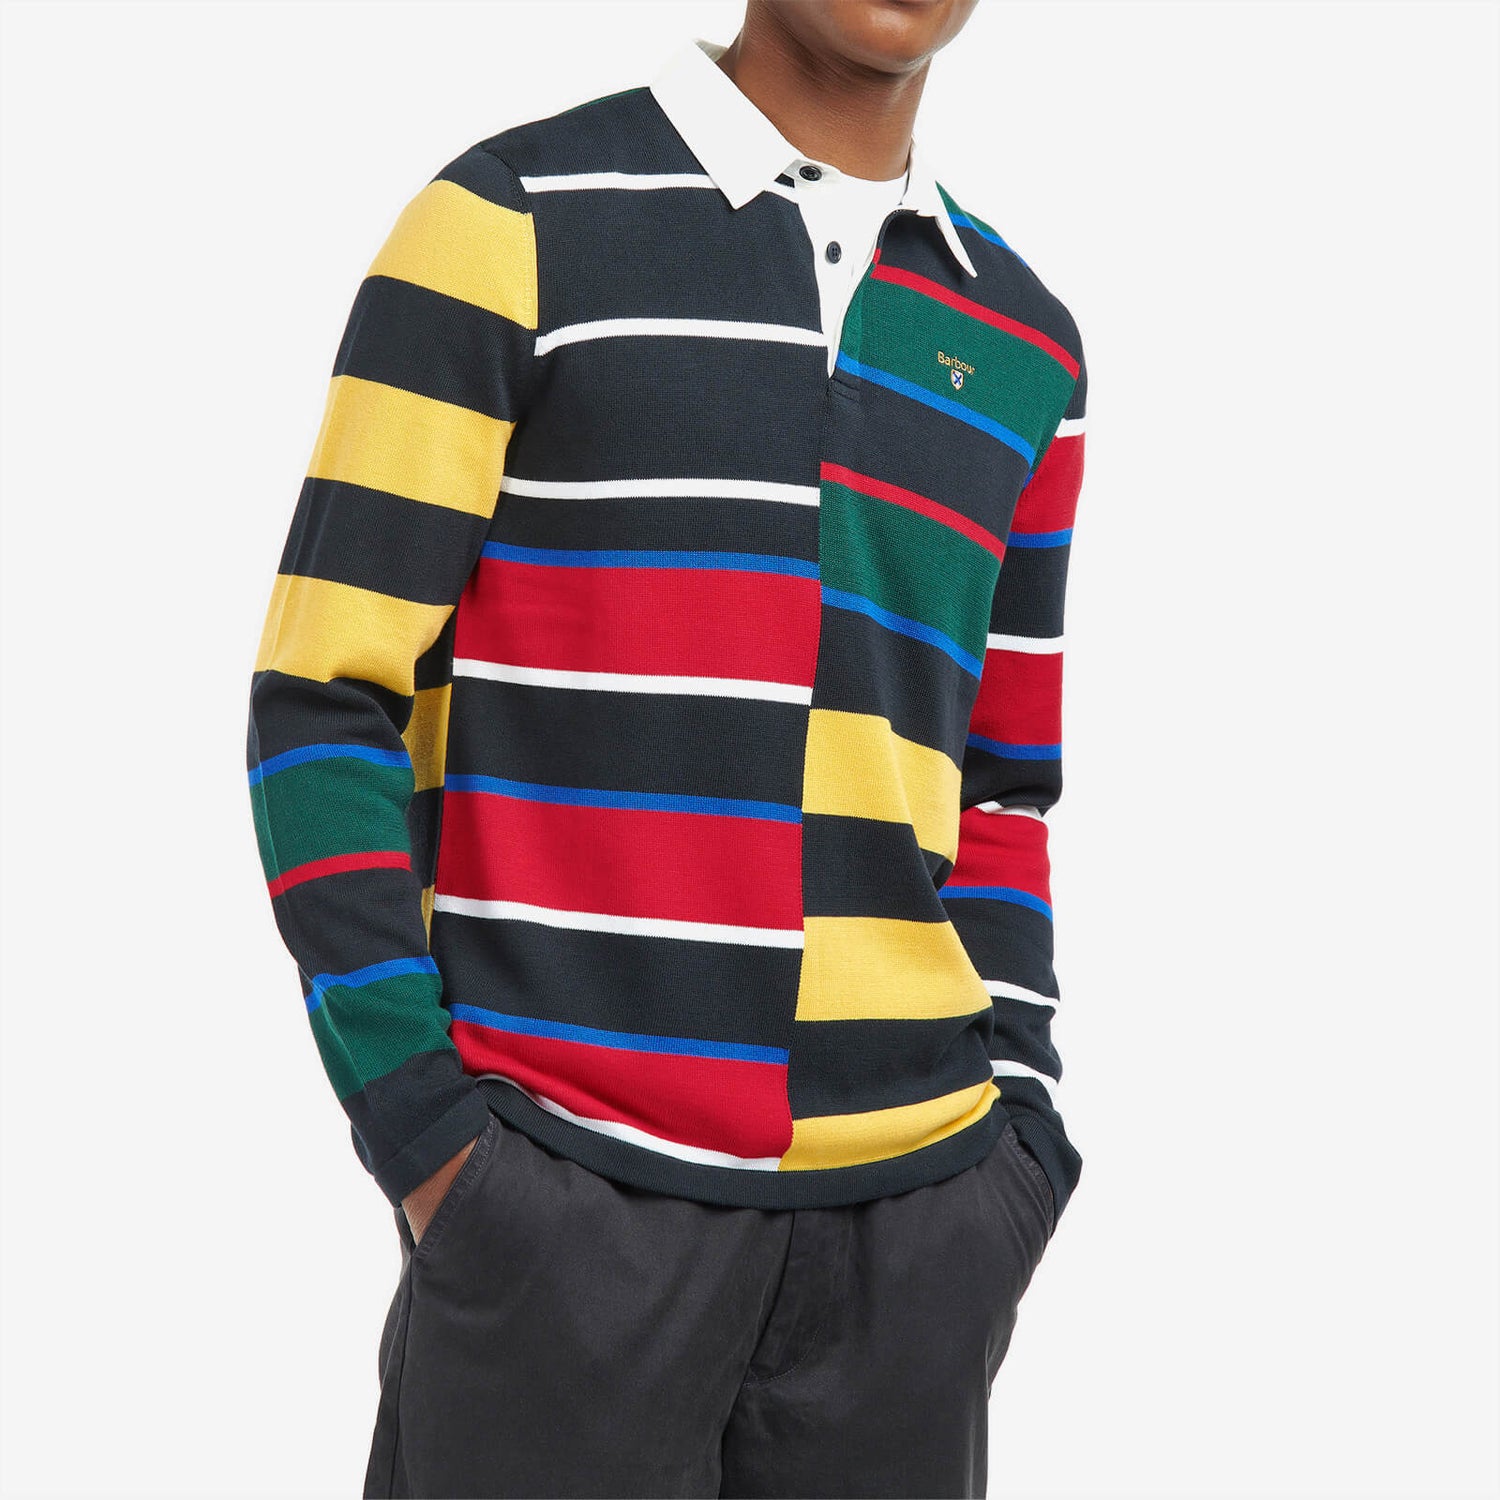 Barbour Heritage Radcliffe Striped Cotton Rugby Top - S